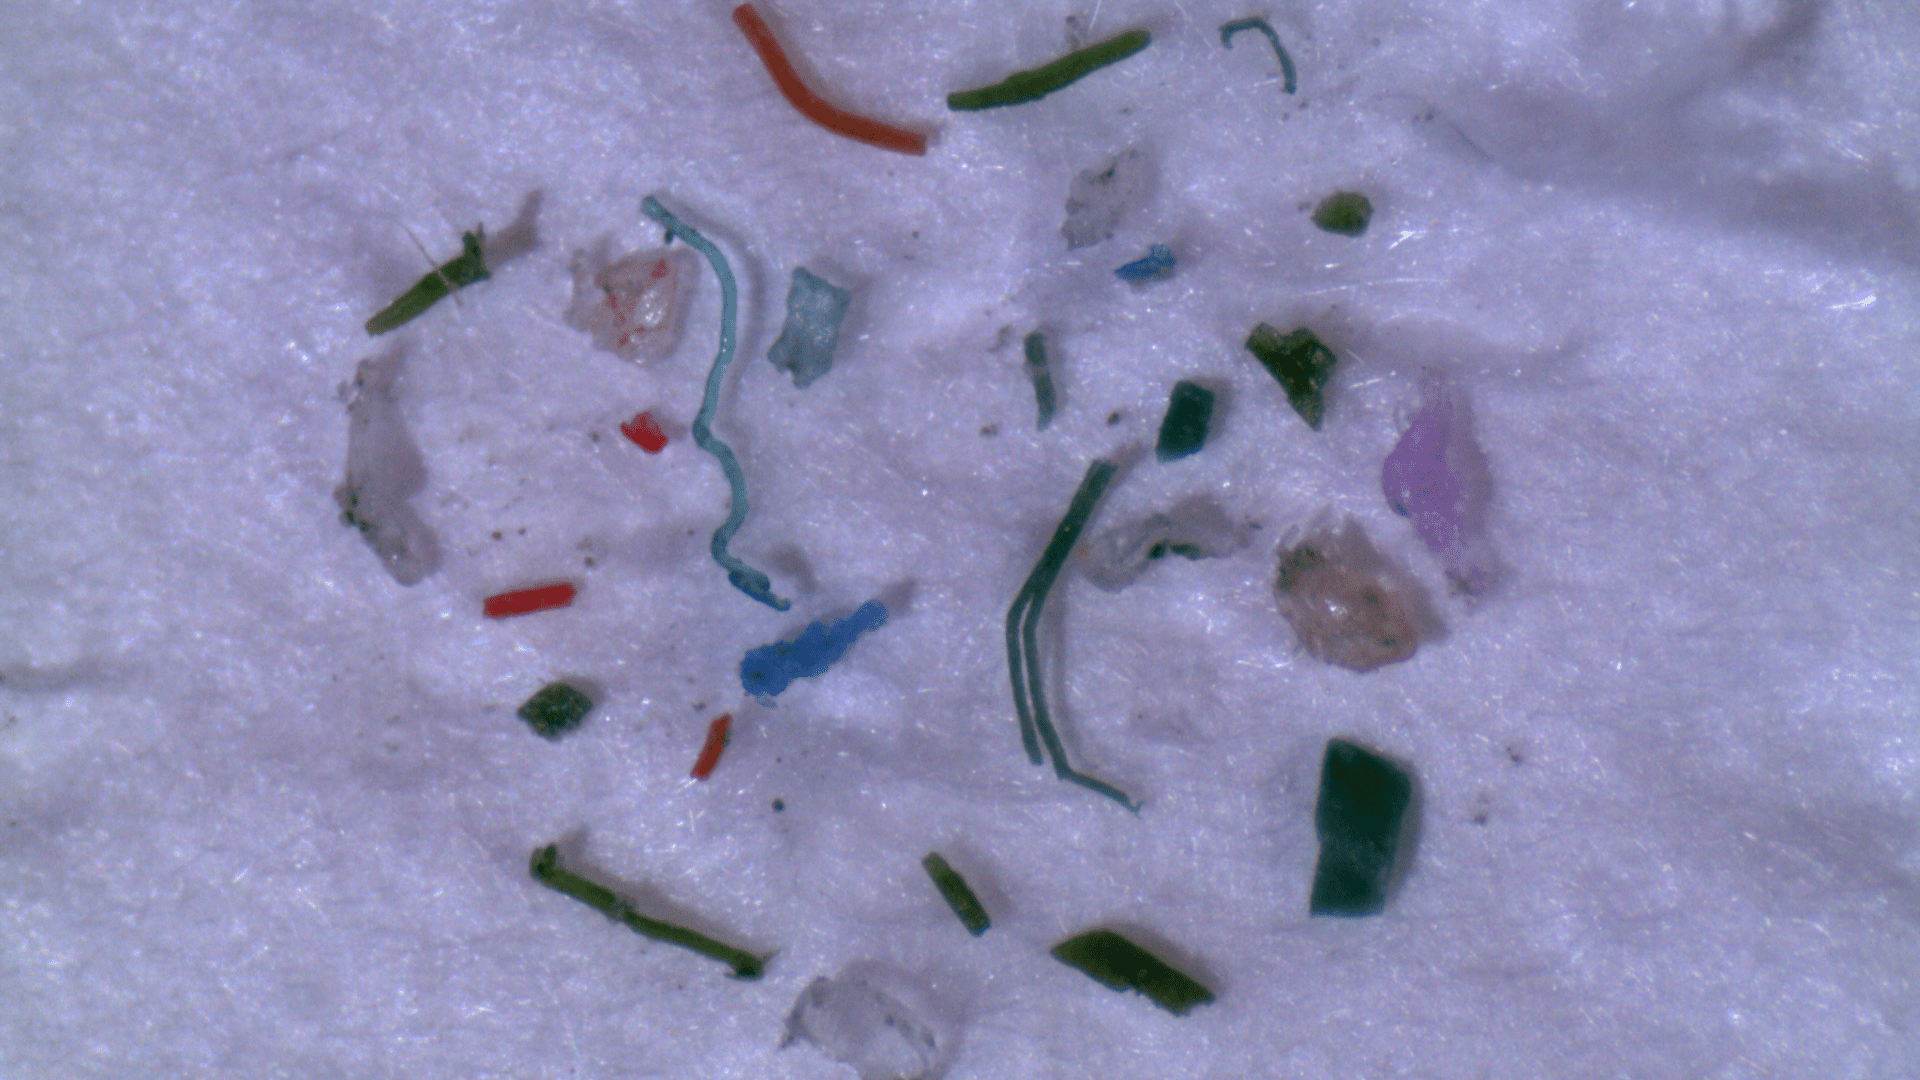 Microplastics: A vast but barely visible problem